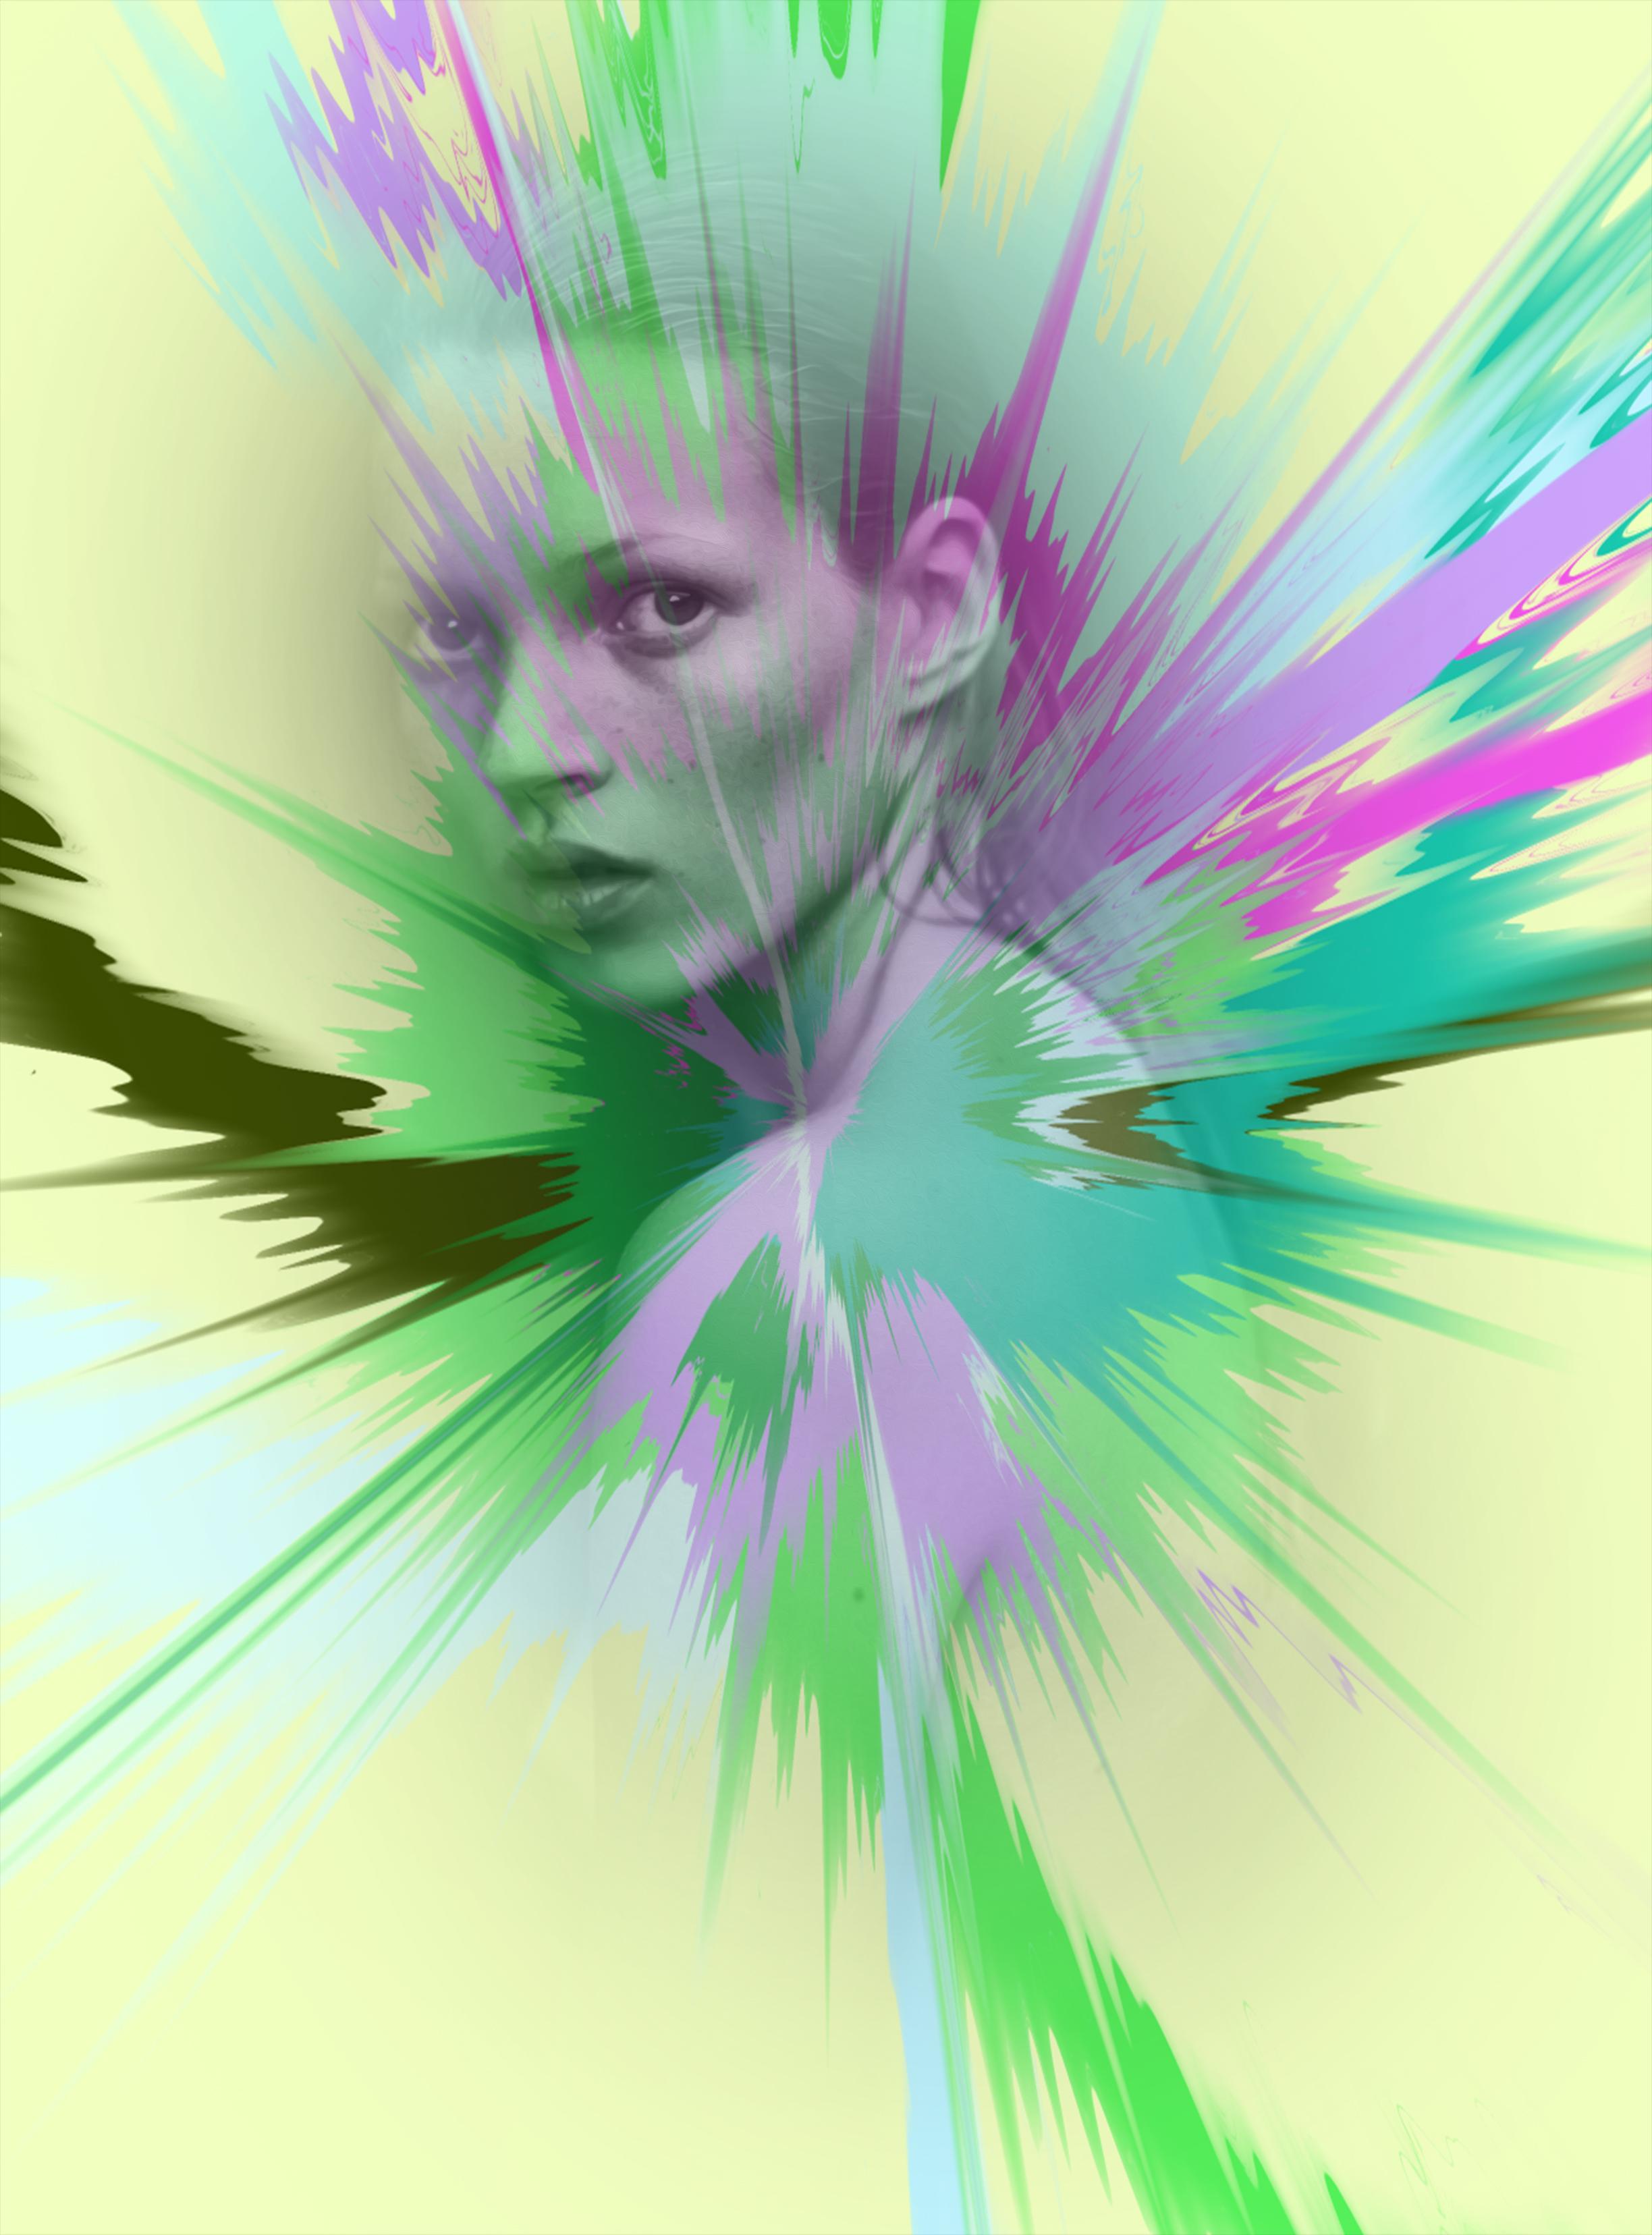 539 - Kate Moss vibrant with diamond dust - Mixed Media Art by Punk Me Tender